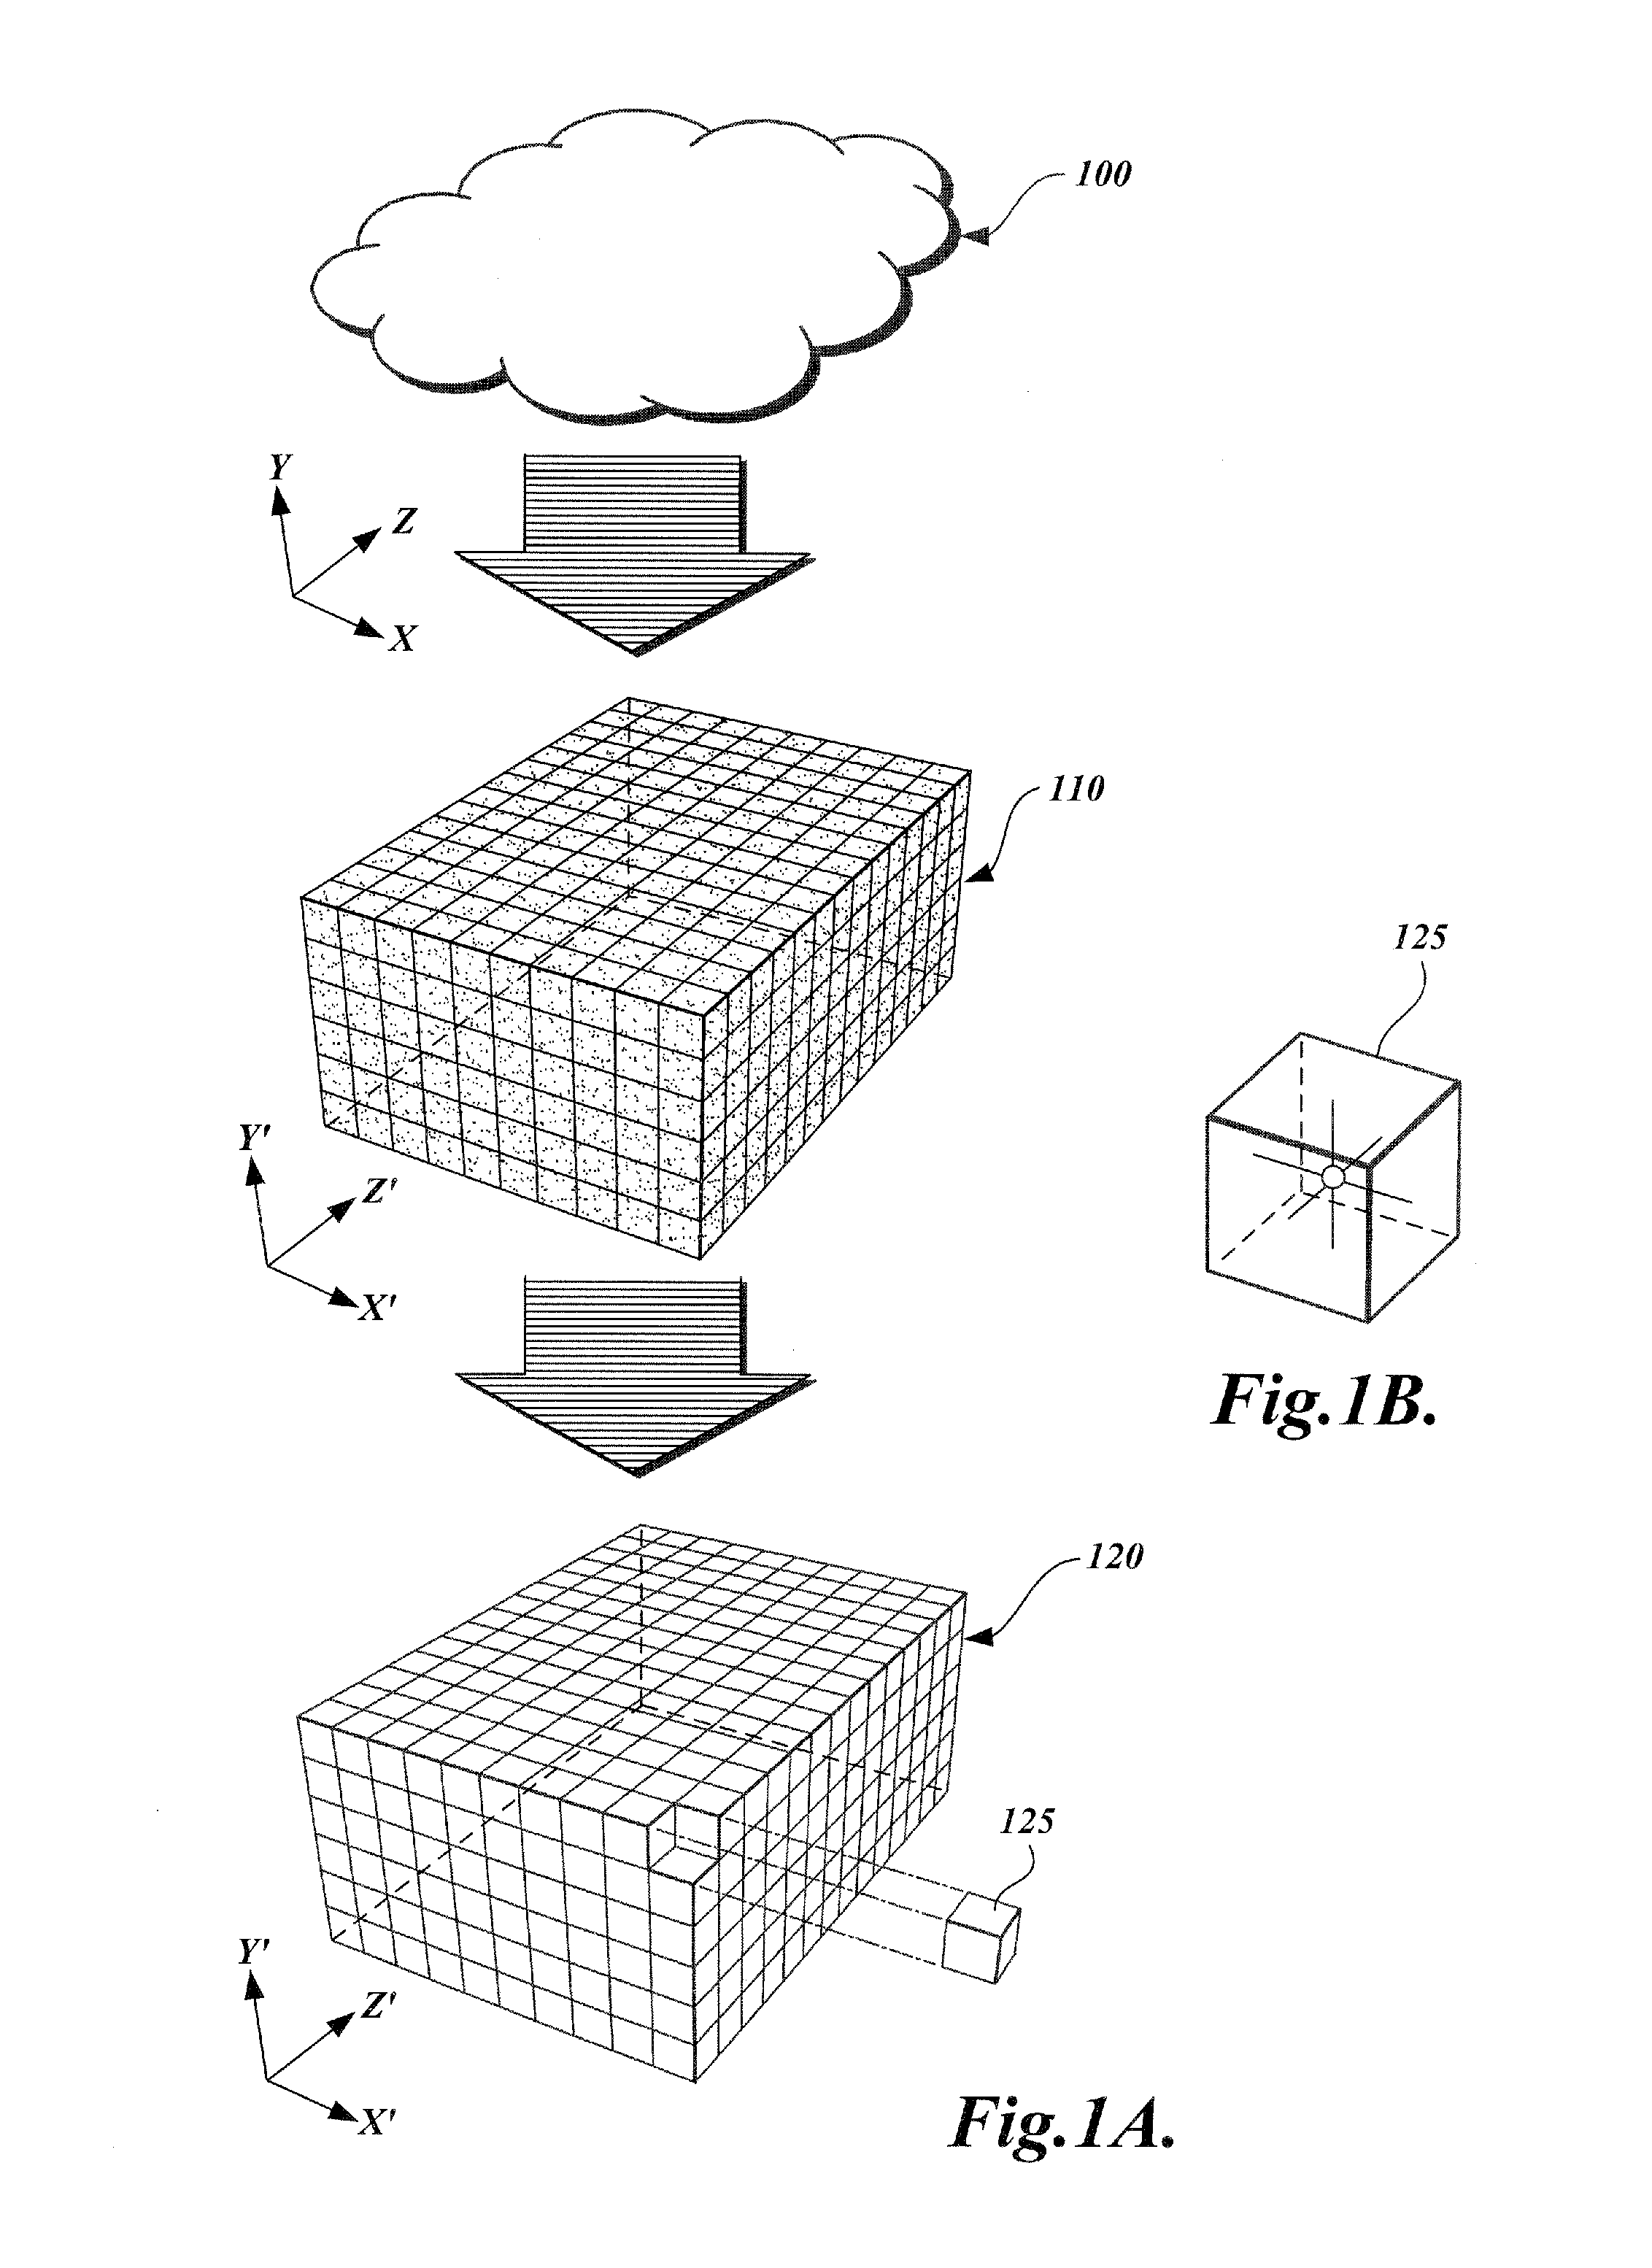 Method and apparatus for transforming point cloud data to volumetric data